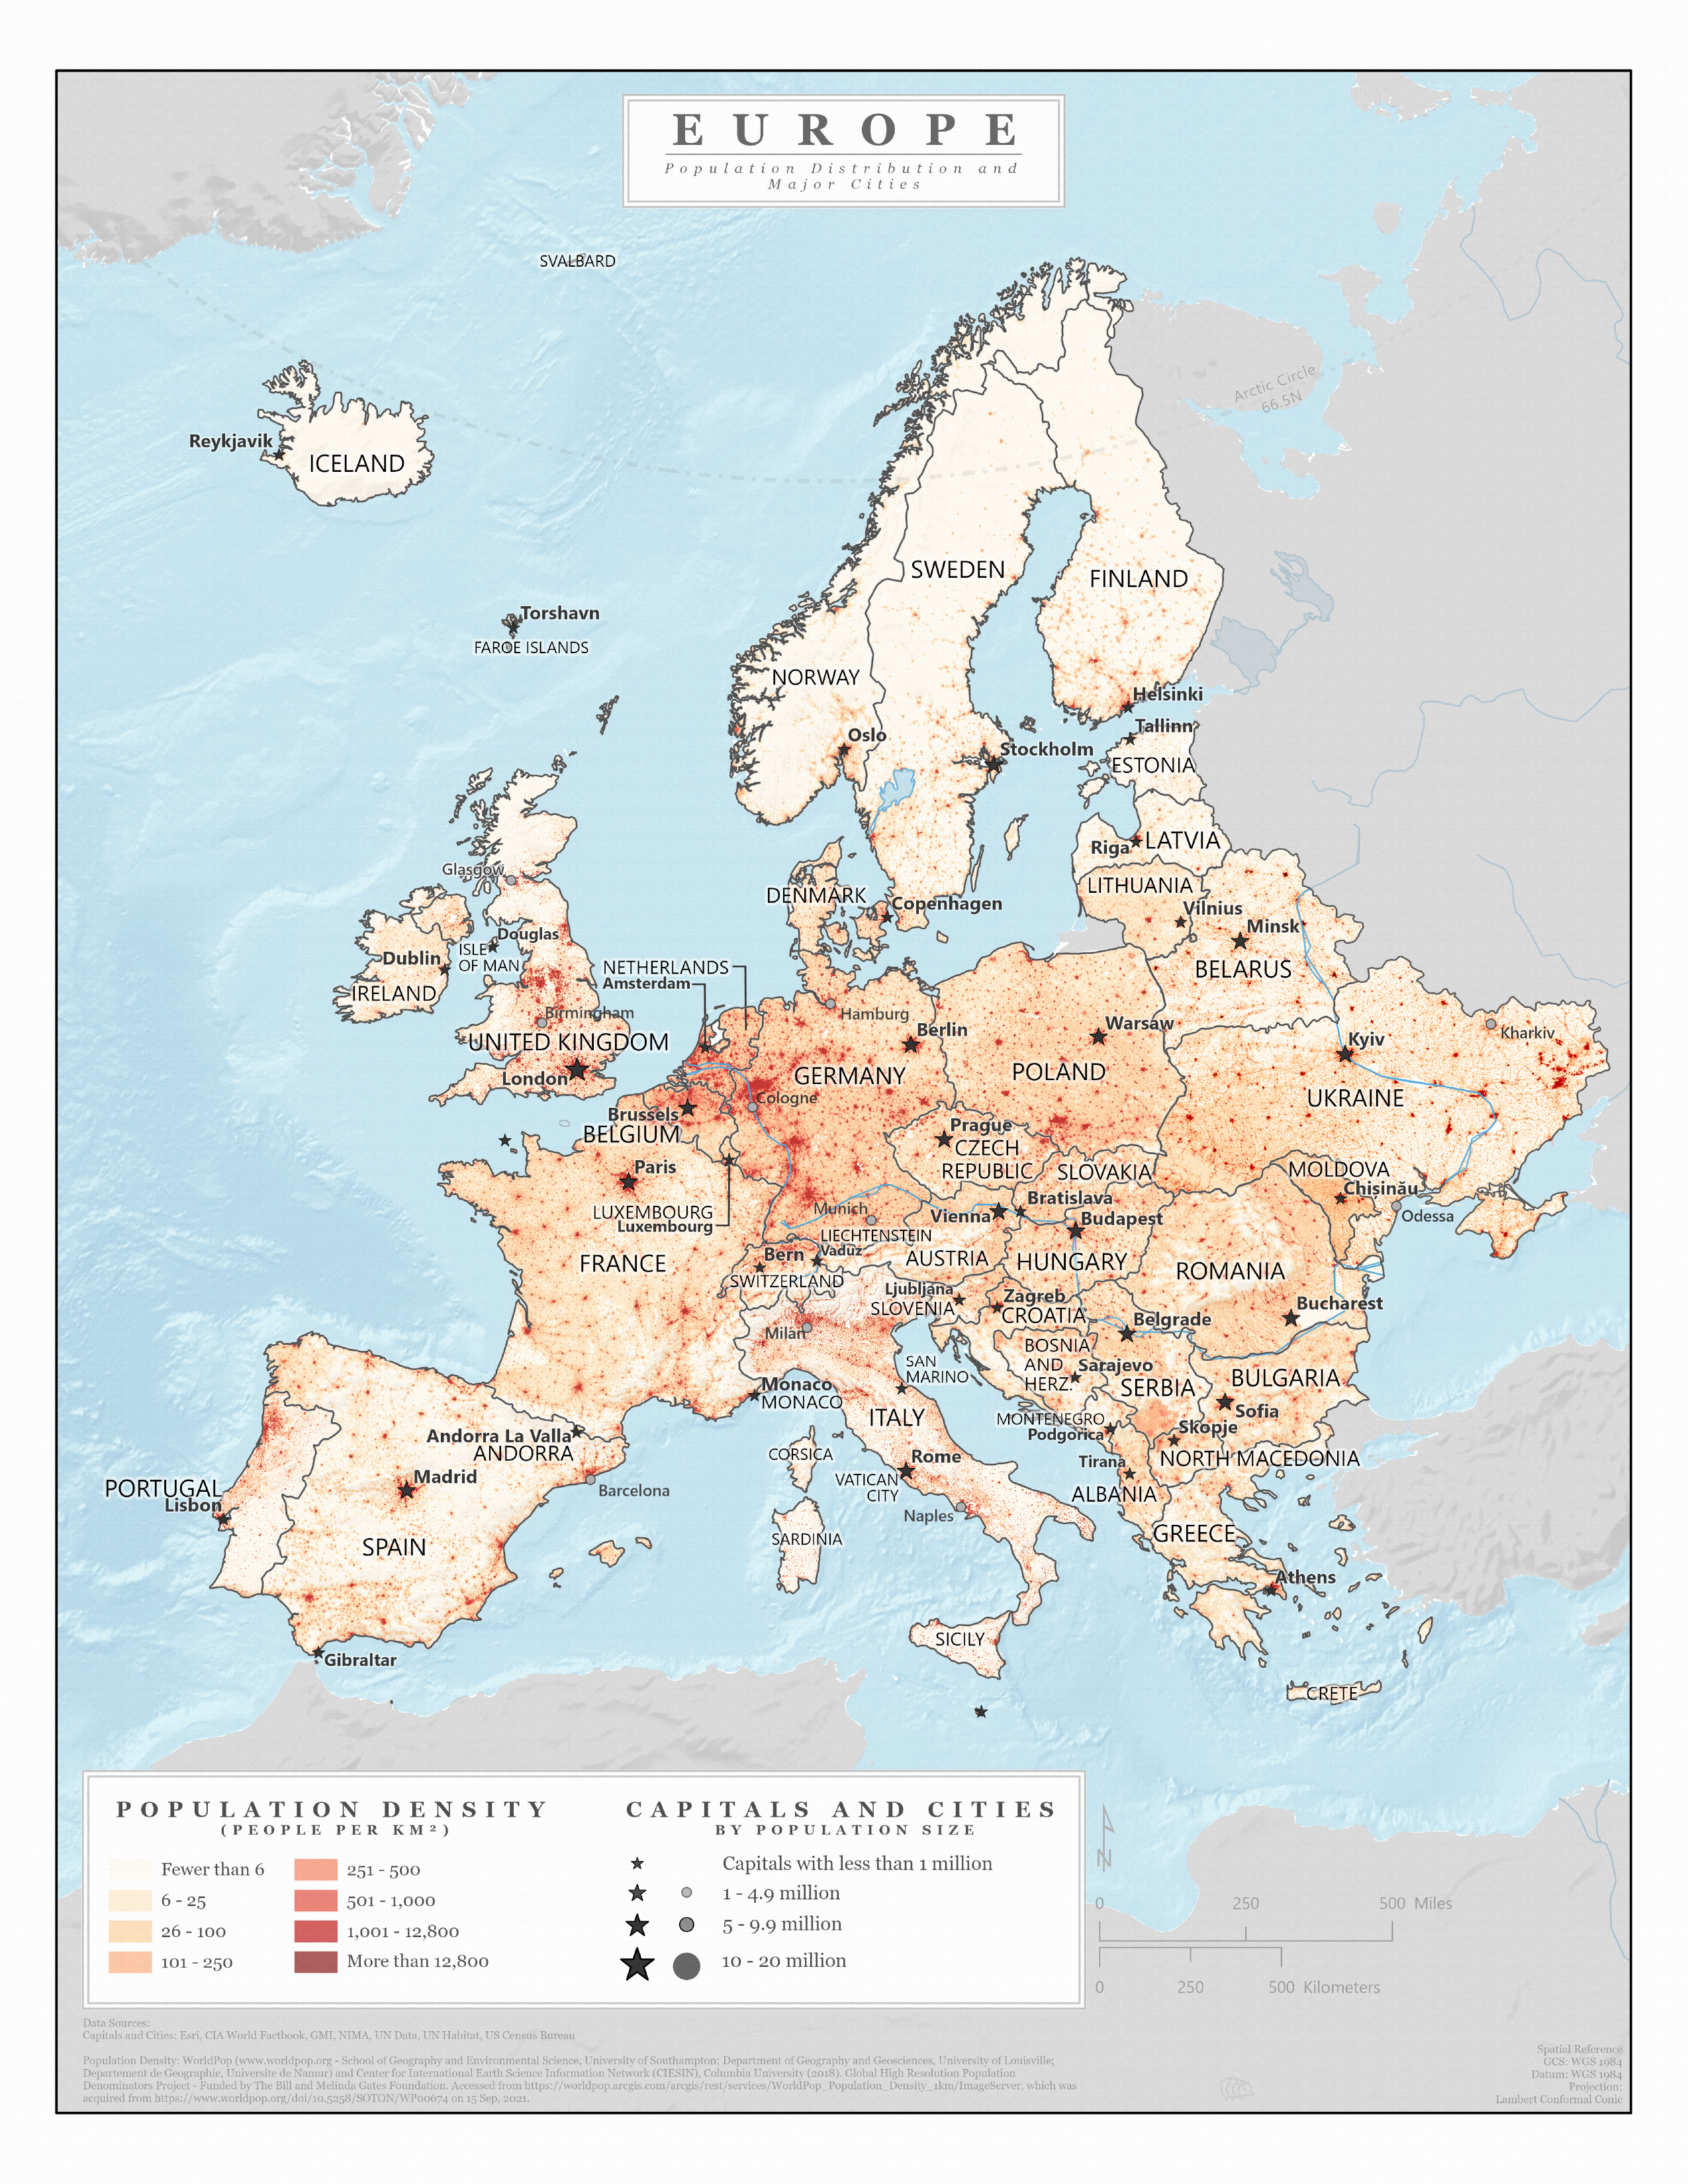 Countries, capitals, and population sizes map of Europe